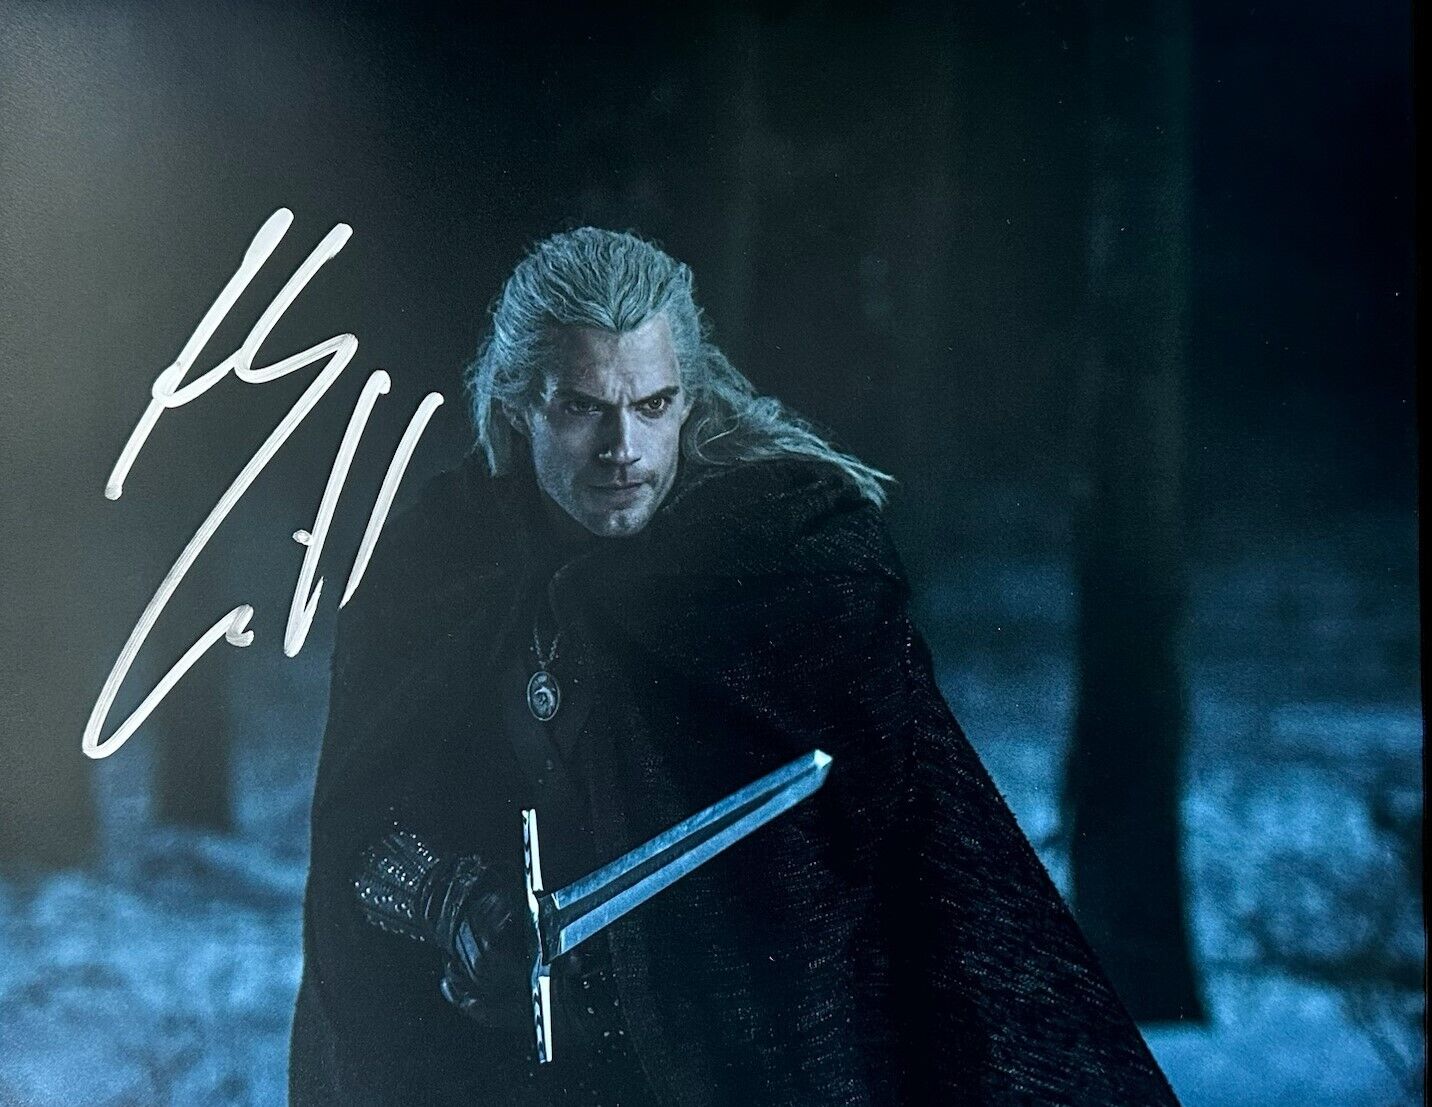 Henry Cavill THE WITCHER Signed 11x14 Photo OnlineCOA AFTAL #12